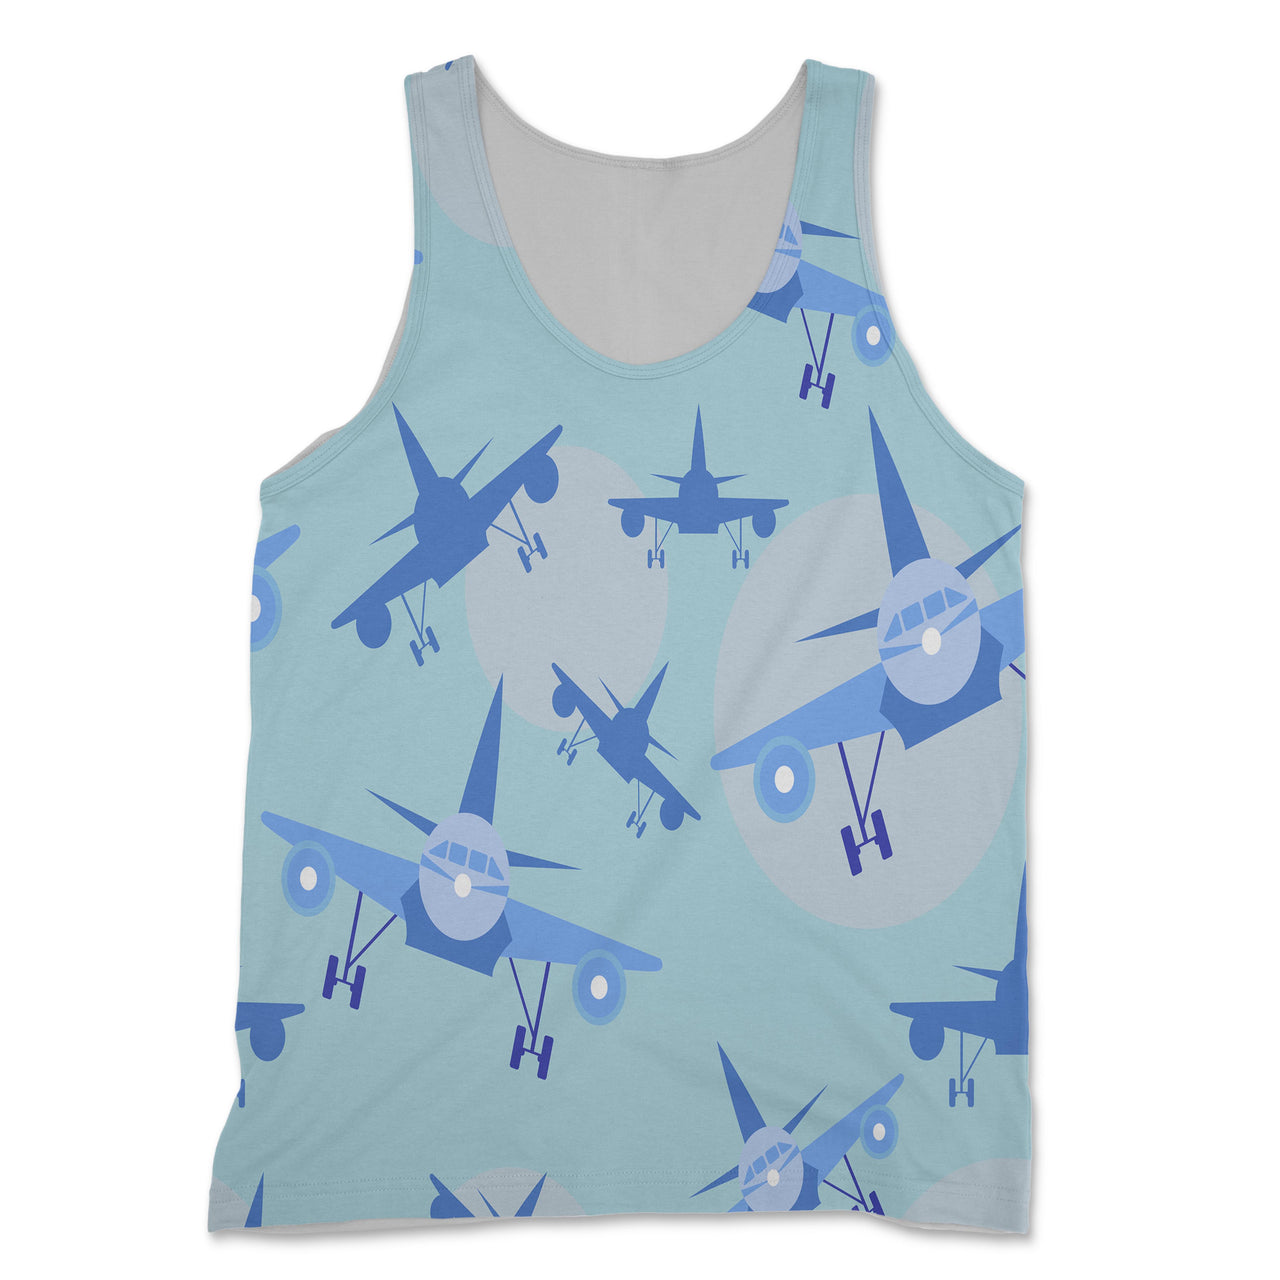 Super Funny Airplanes Designed 3D Tank Tops